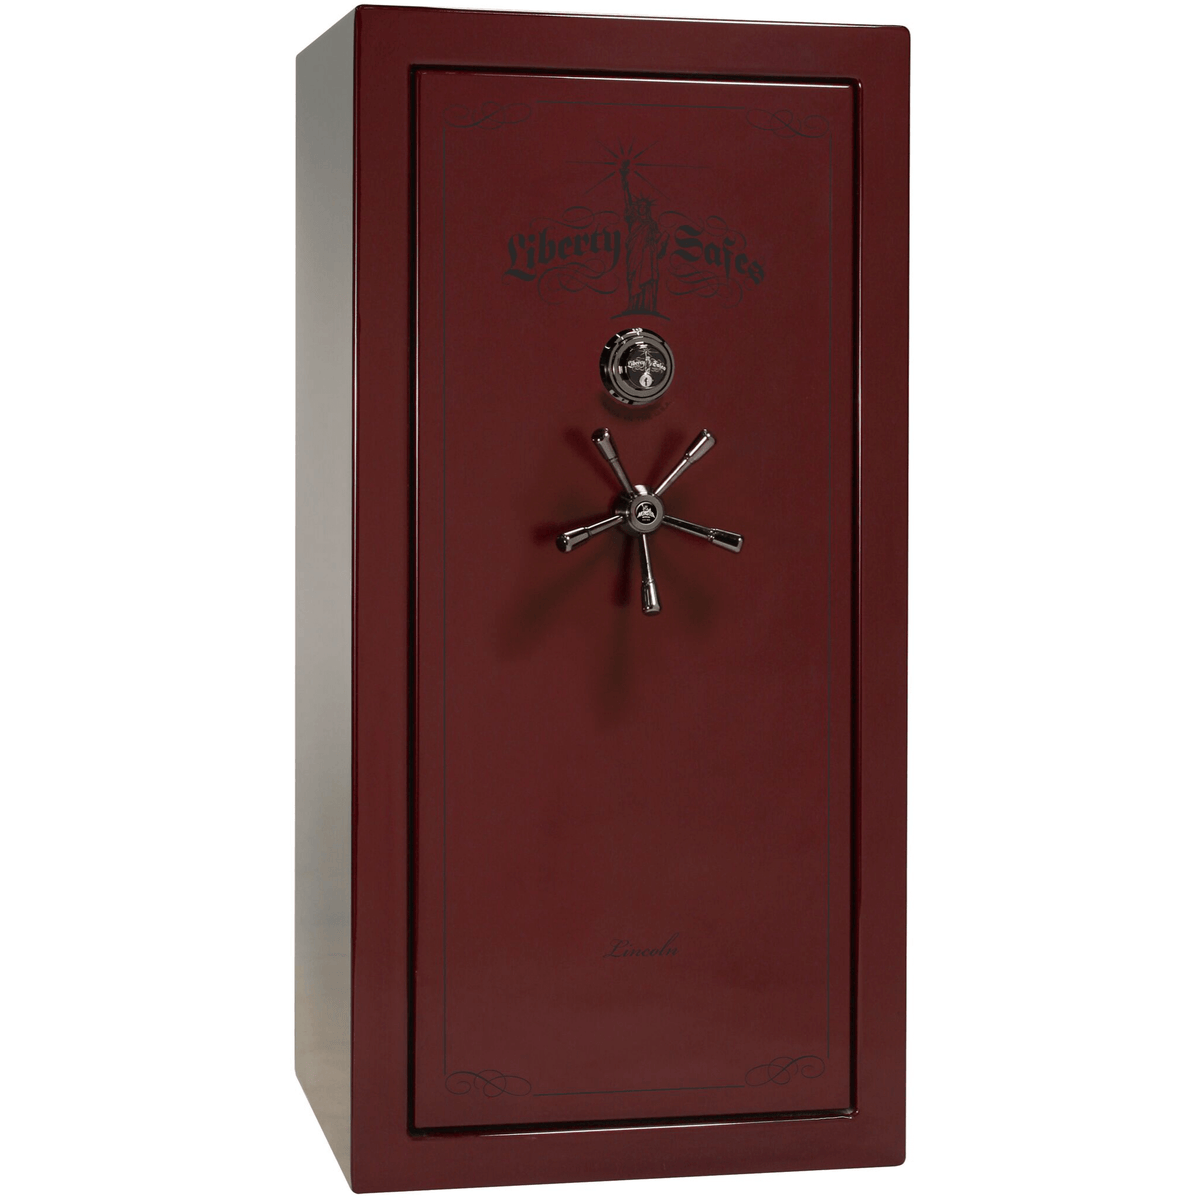 Liberty Lincoln 25 Safe in Burgundy Gloss with Black Chrome Mechanical Lock.